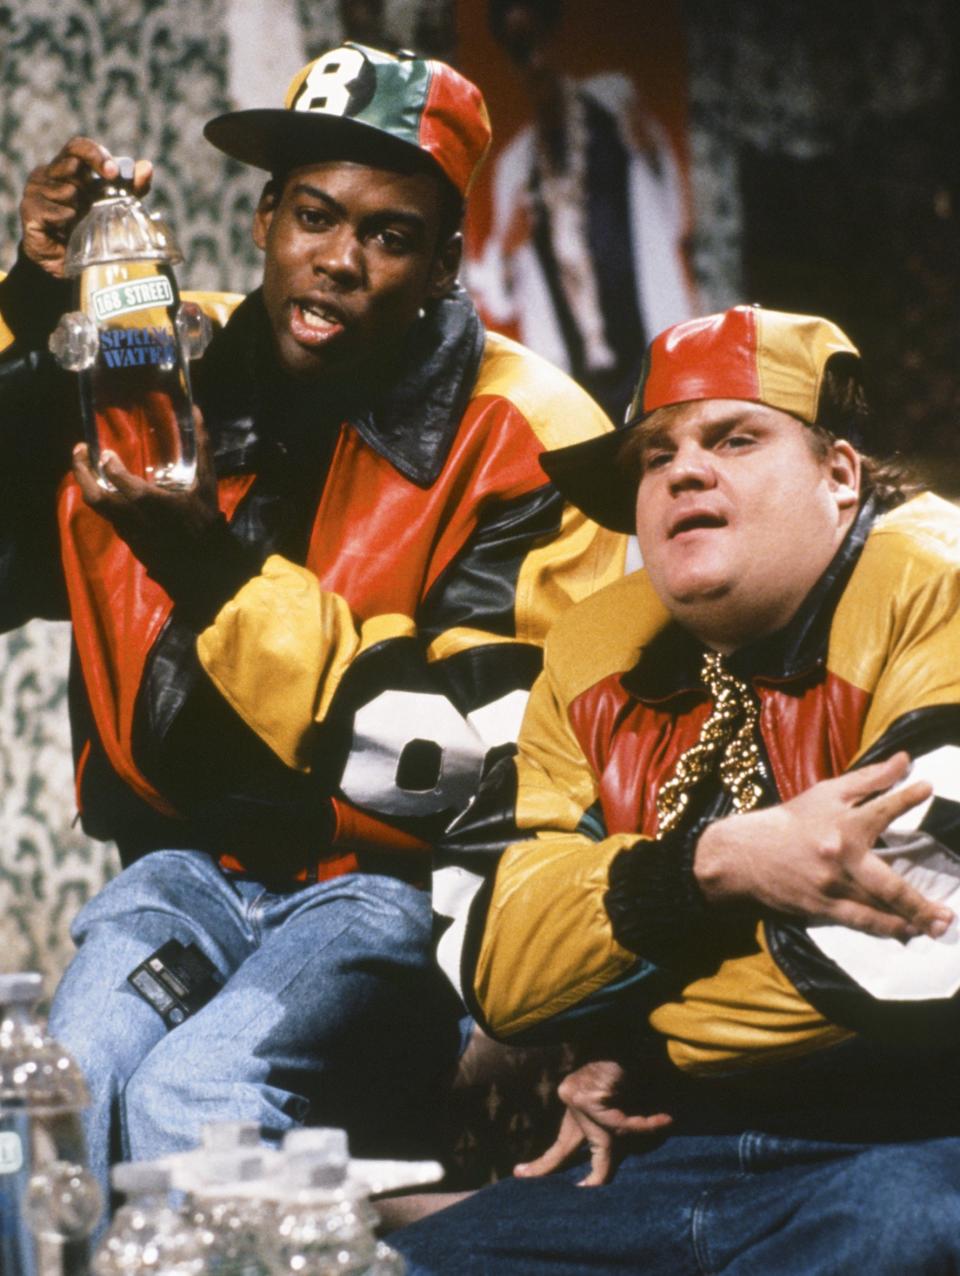 Chris Rock as Onski, Chris Farley as B Fats during the 'I'm Chillin'' skit on December 2, 1991